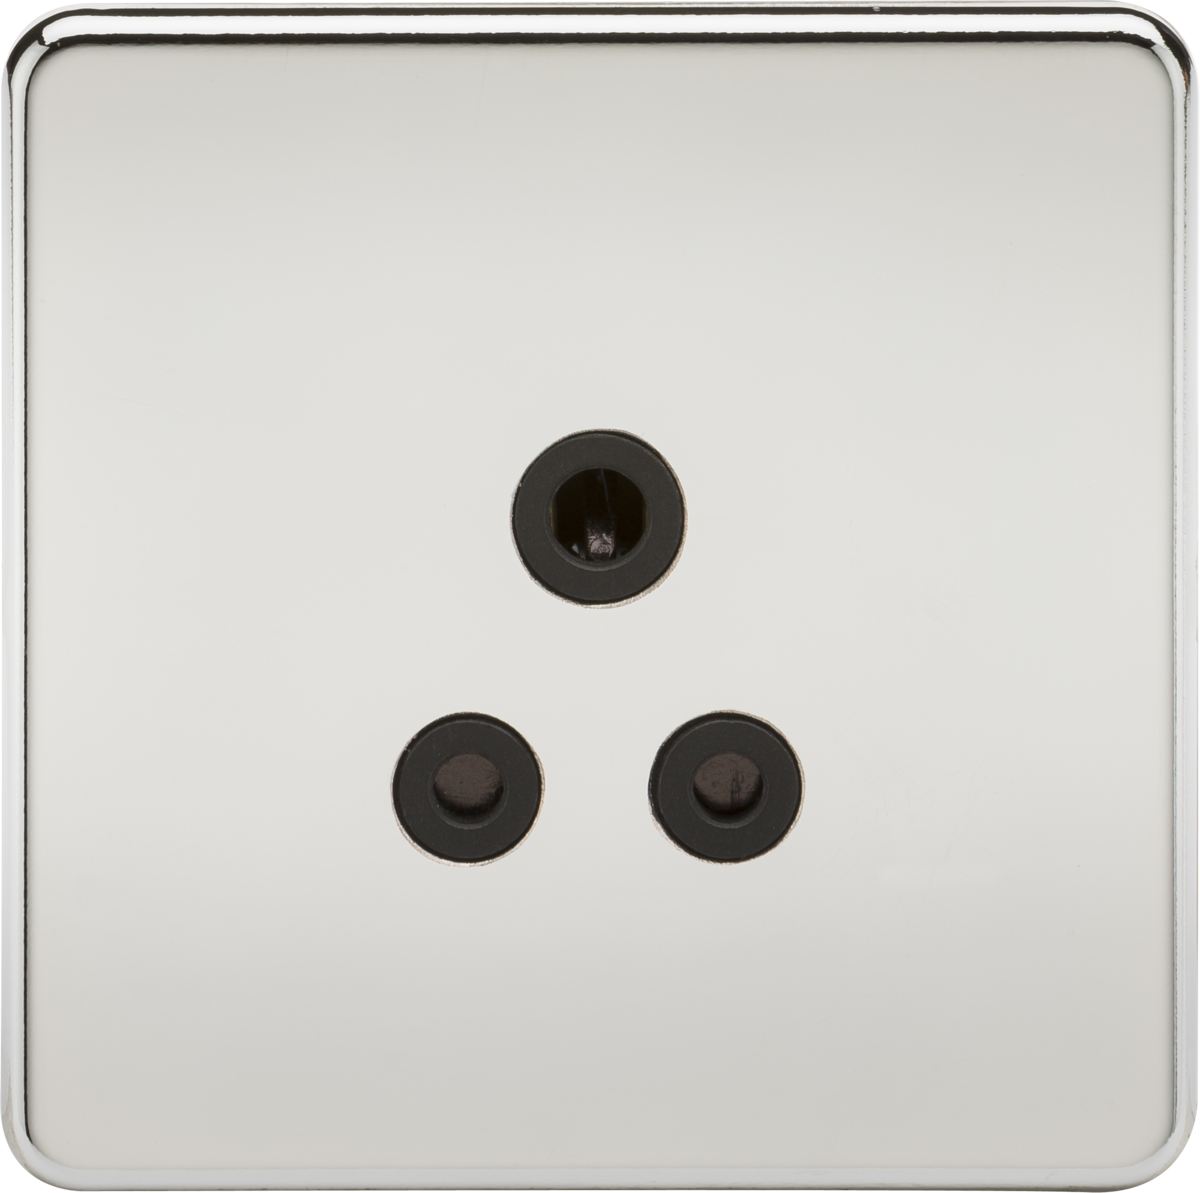 Screwless 5A Unswitched Socket - Polished Chrome with Black Insert